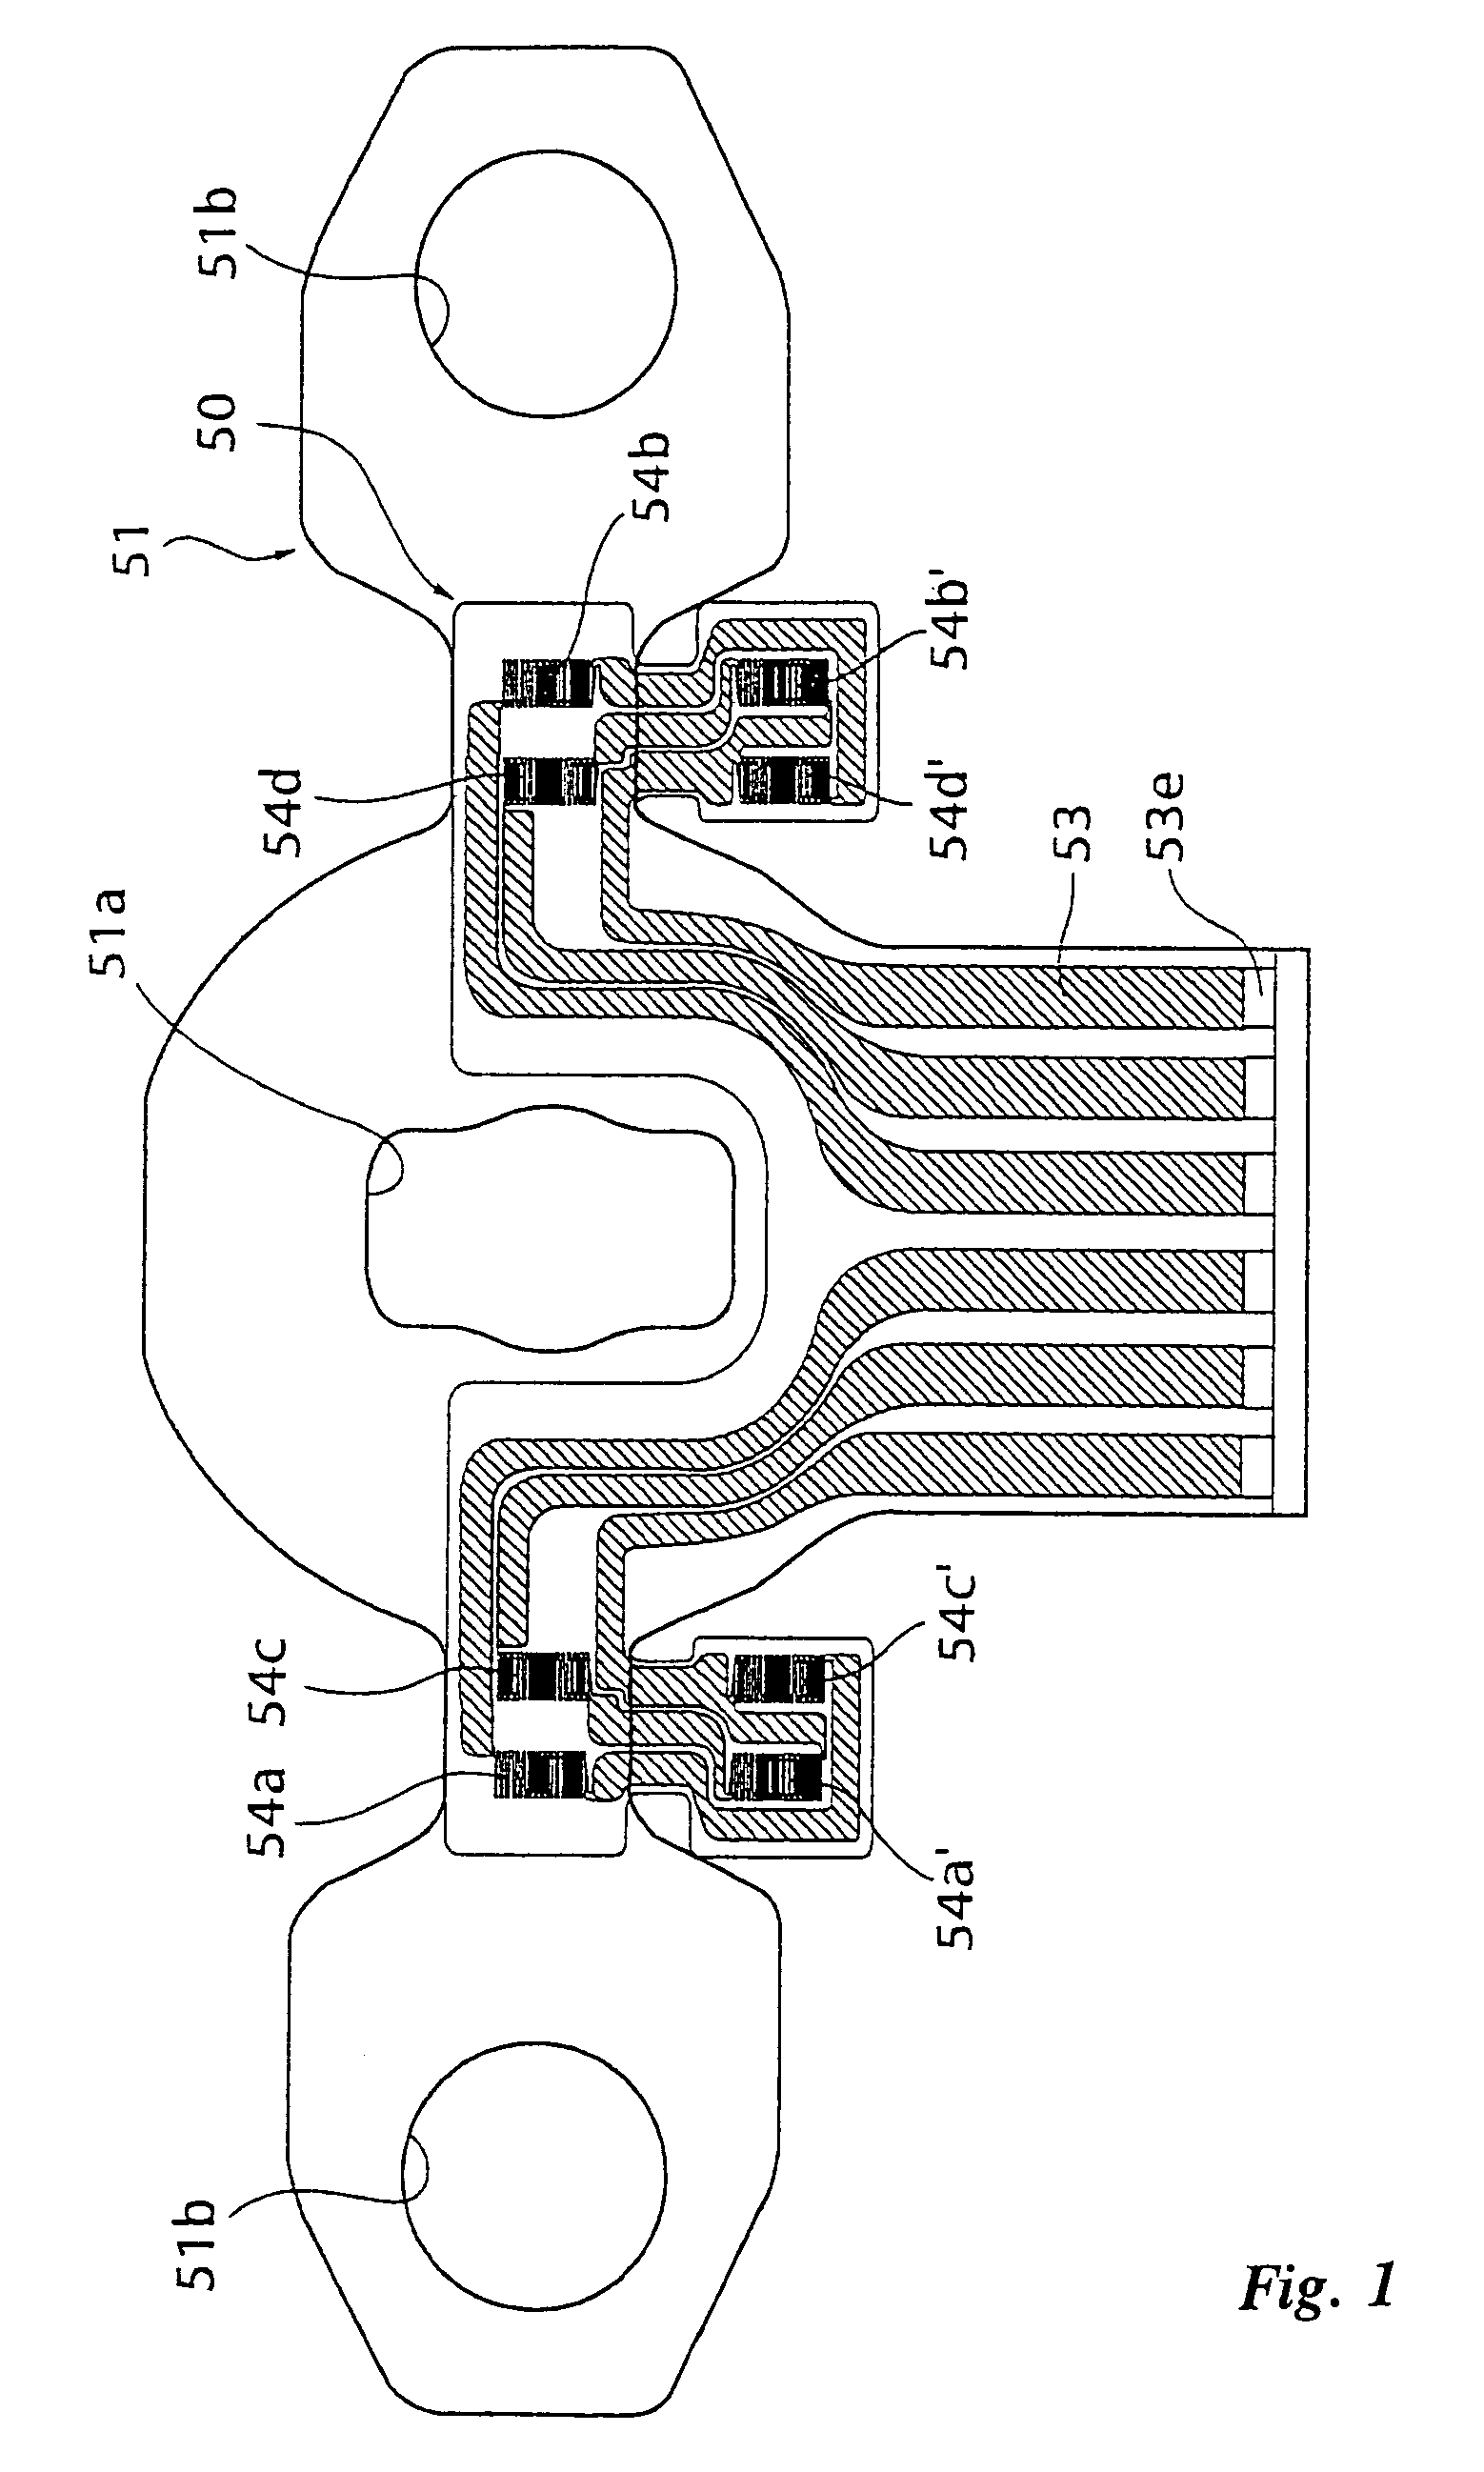 Load sensor and seat weight measuring apparatus with a plurality of strain gauges